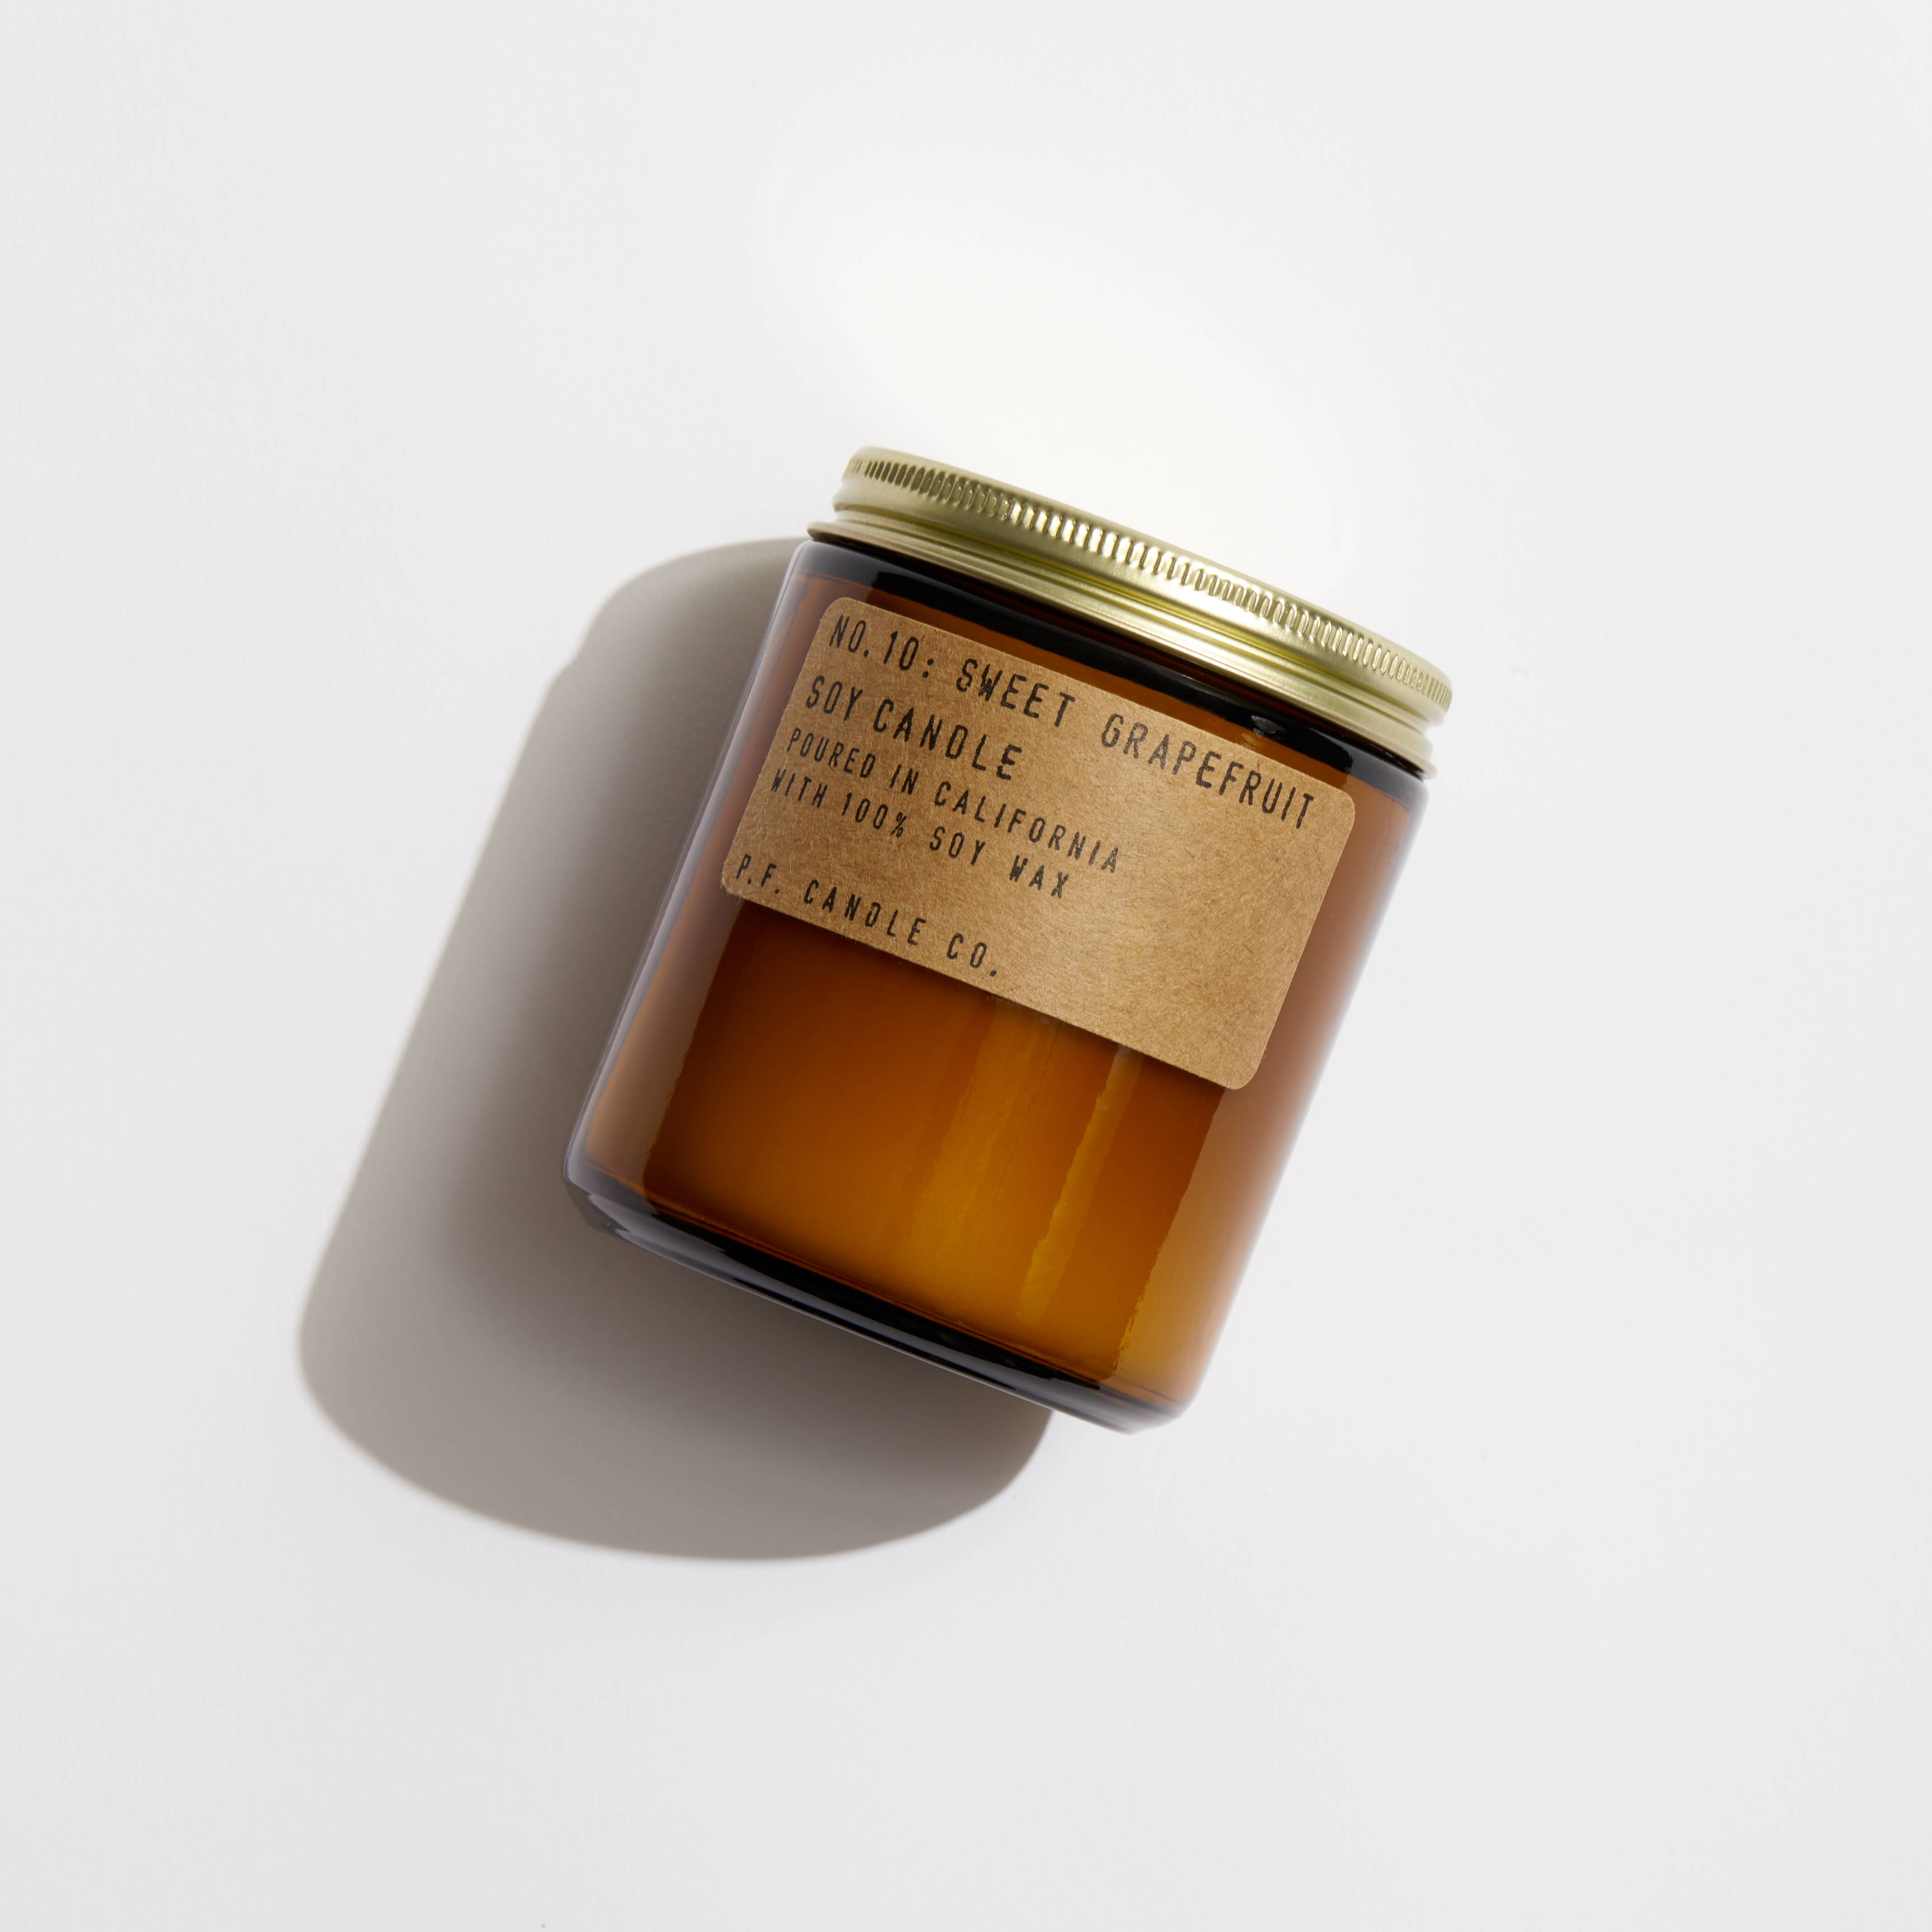 P.F. Candle Co. Standard Soy Candle - Sweet Grapefruit